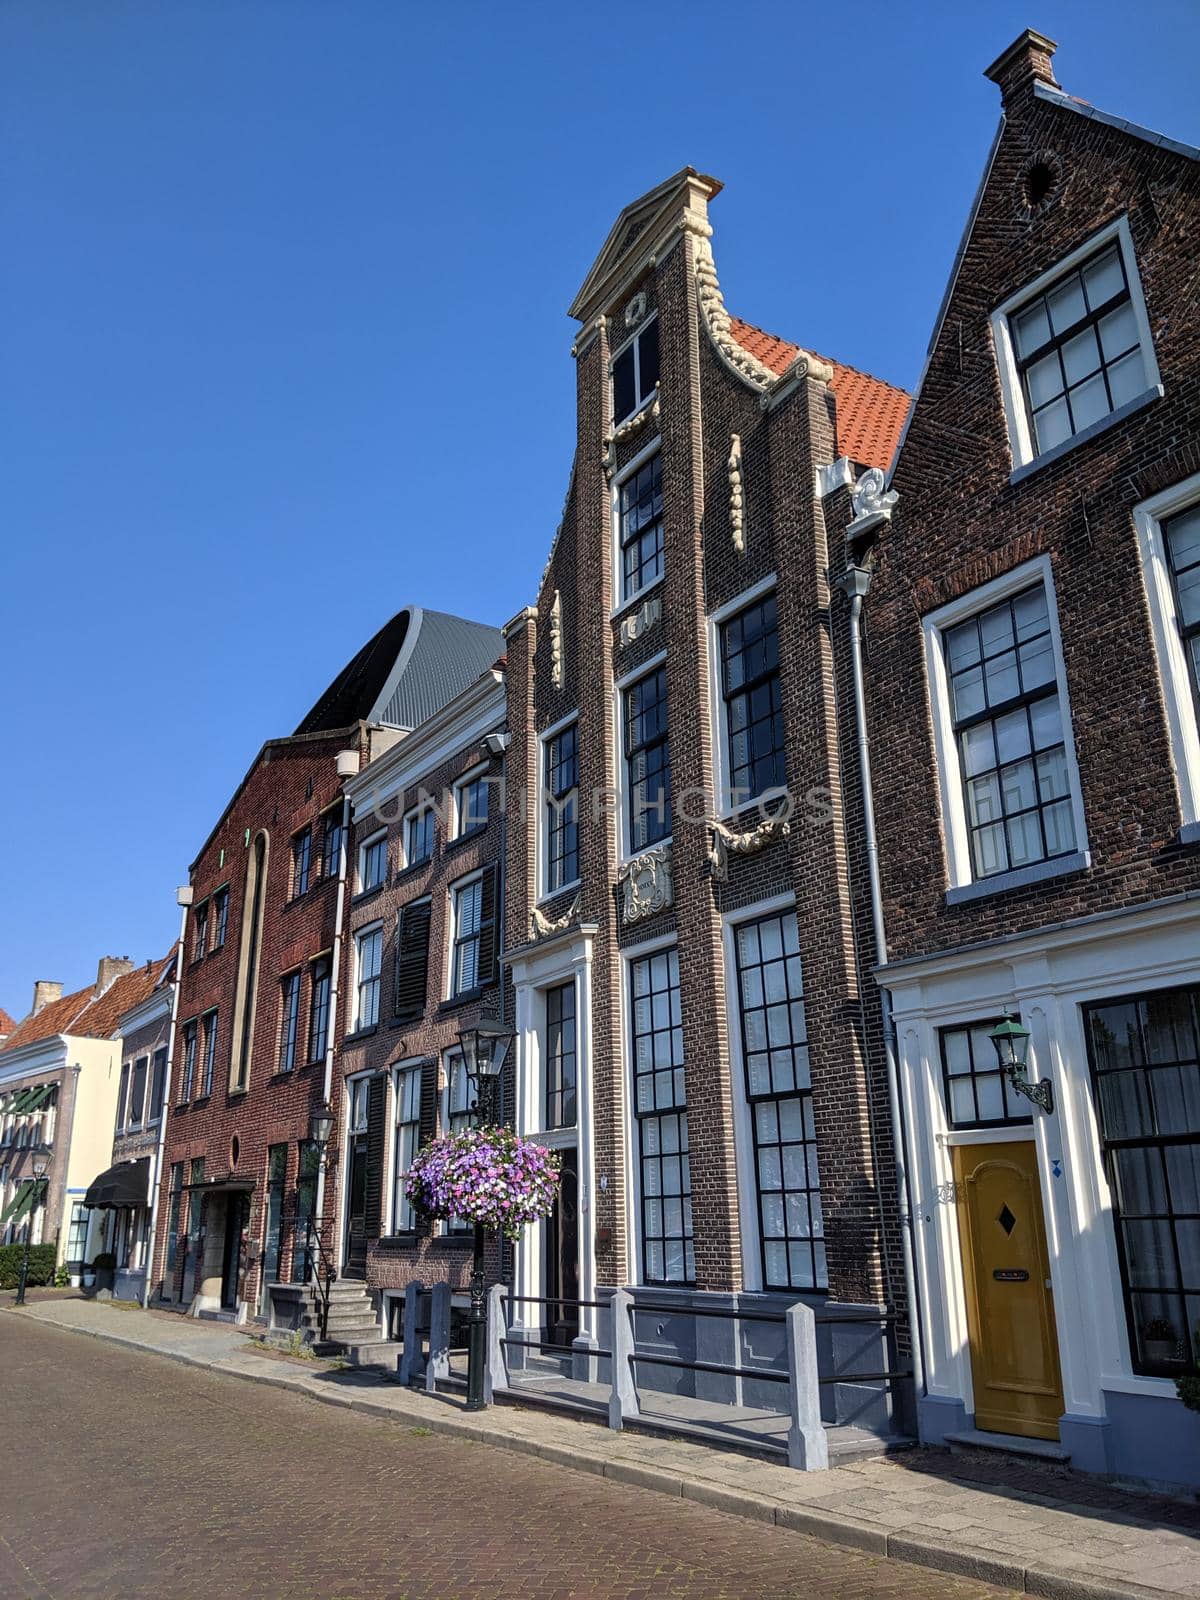 Old town architecture in Zwolle, The Netherlands